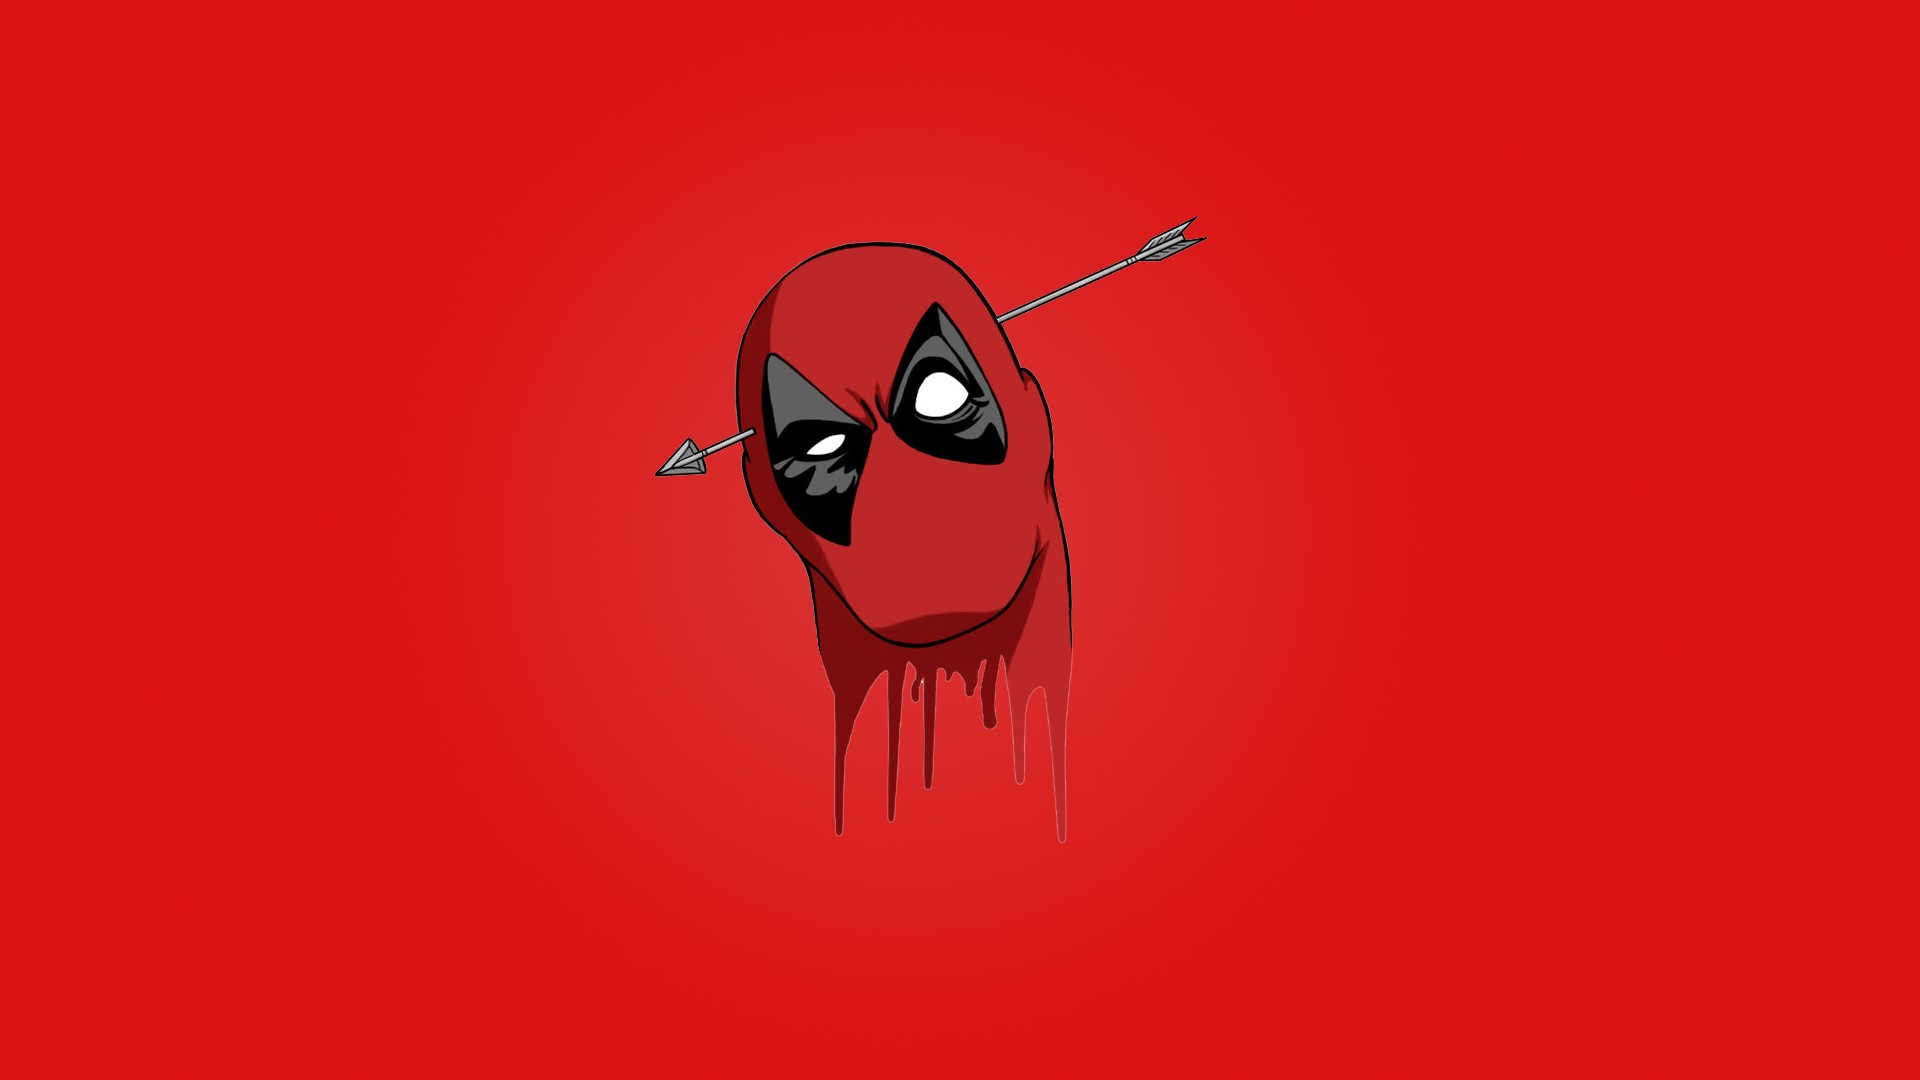 Deadpool wallpaper HD Download free wallpapers for